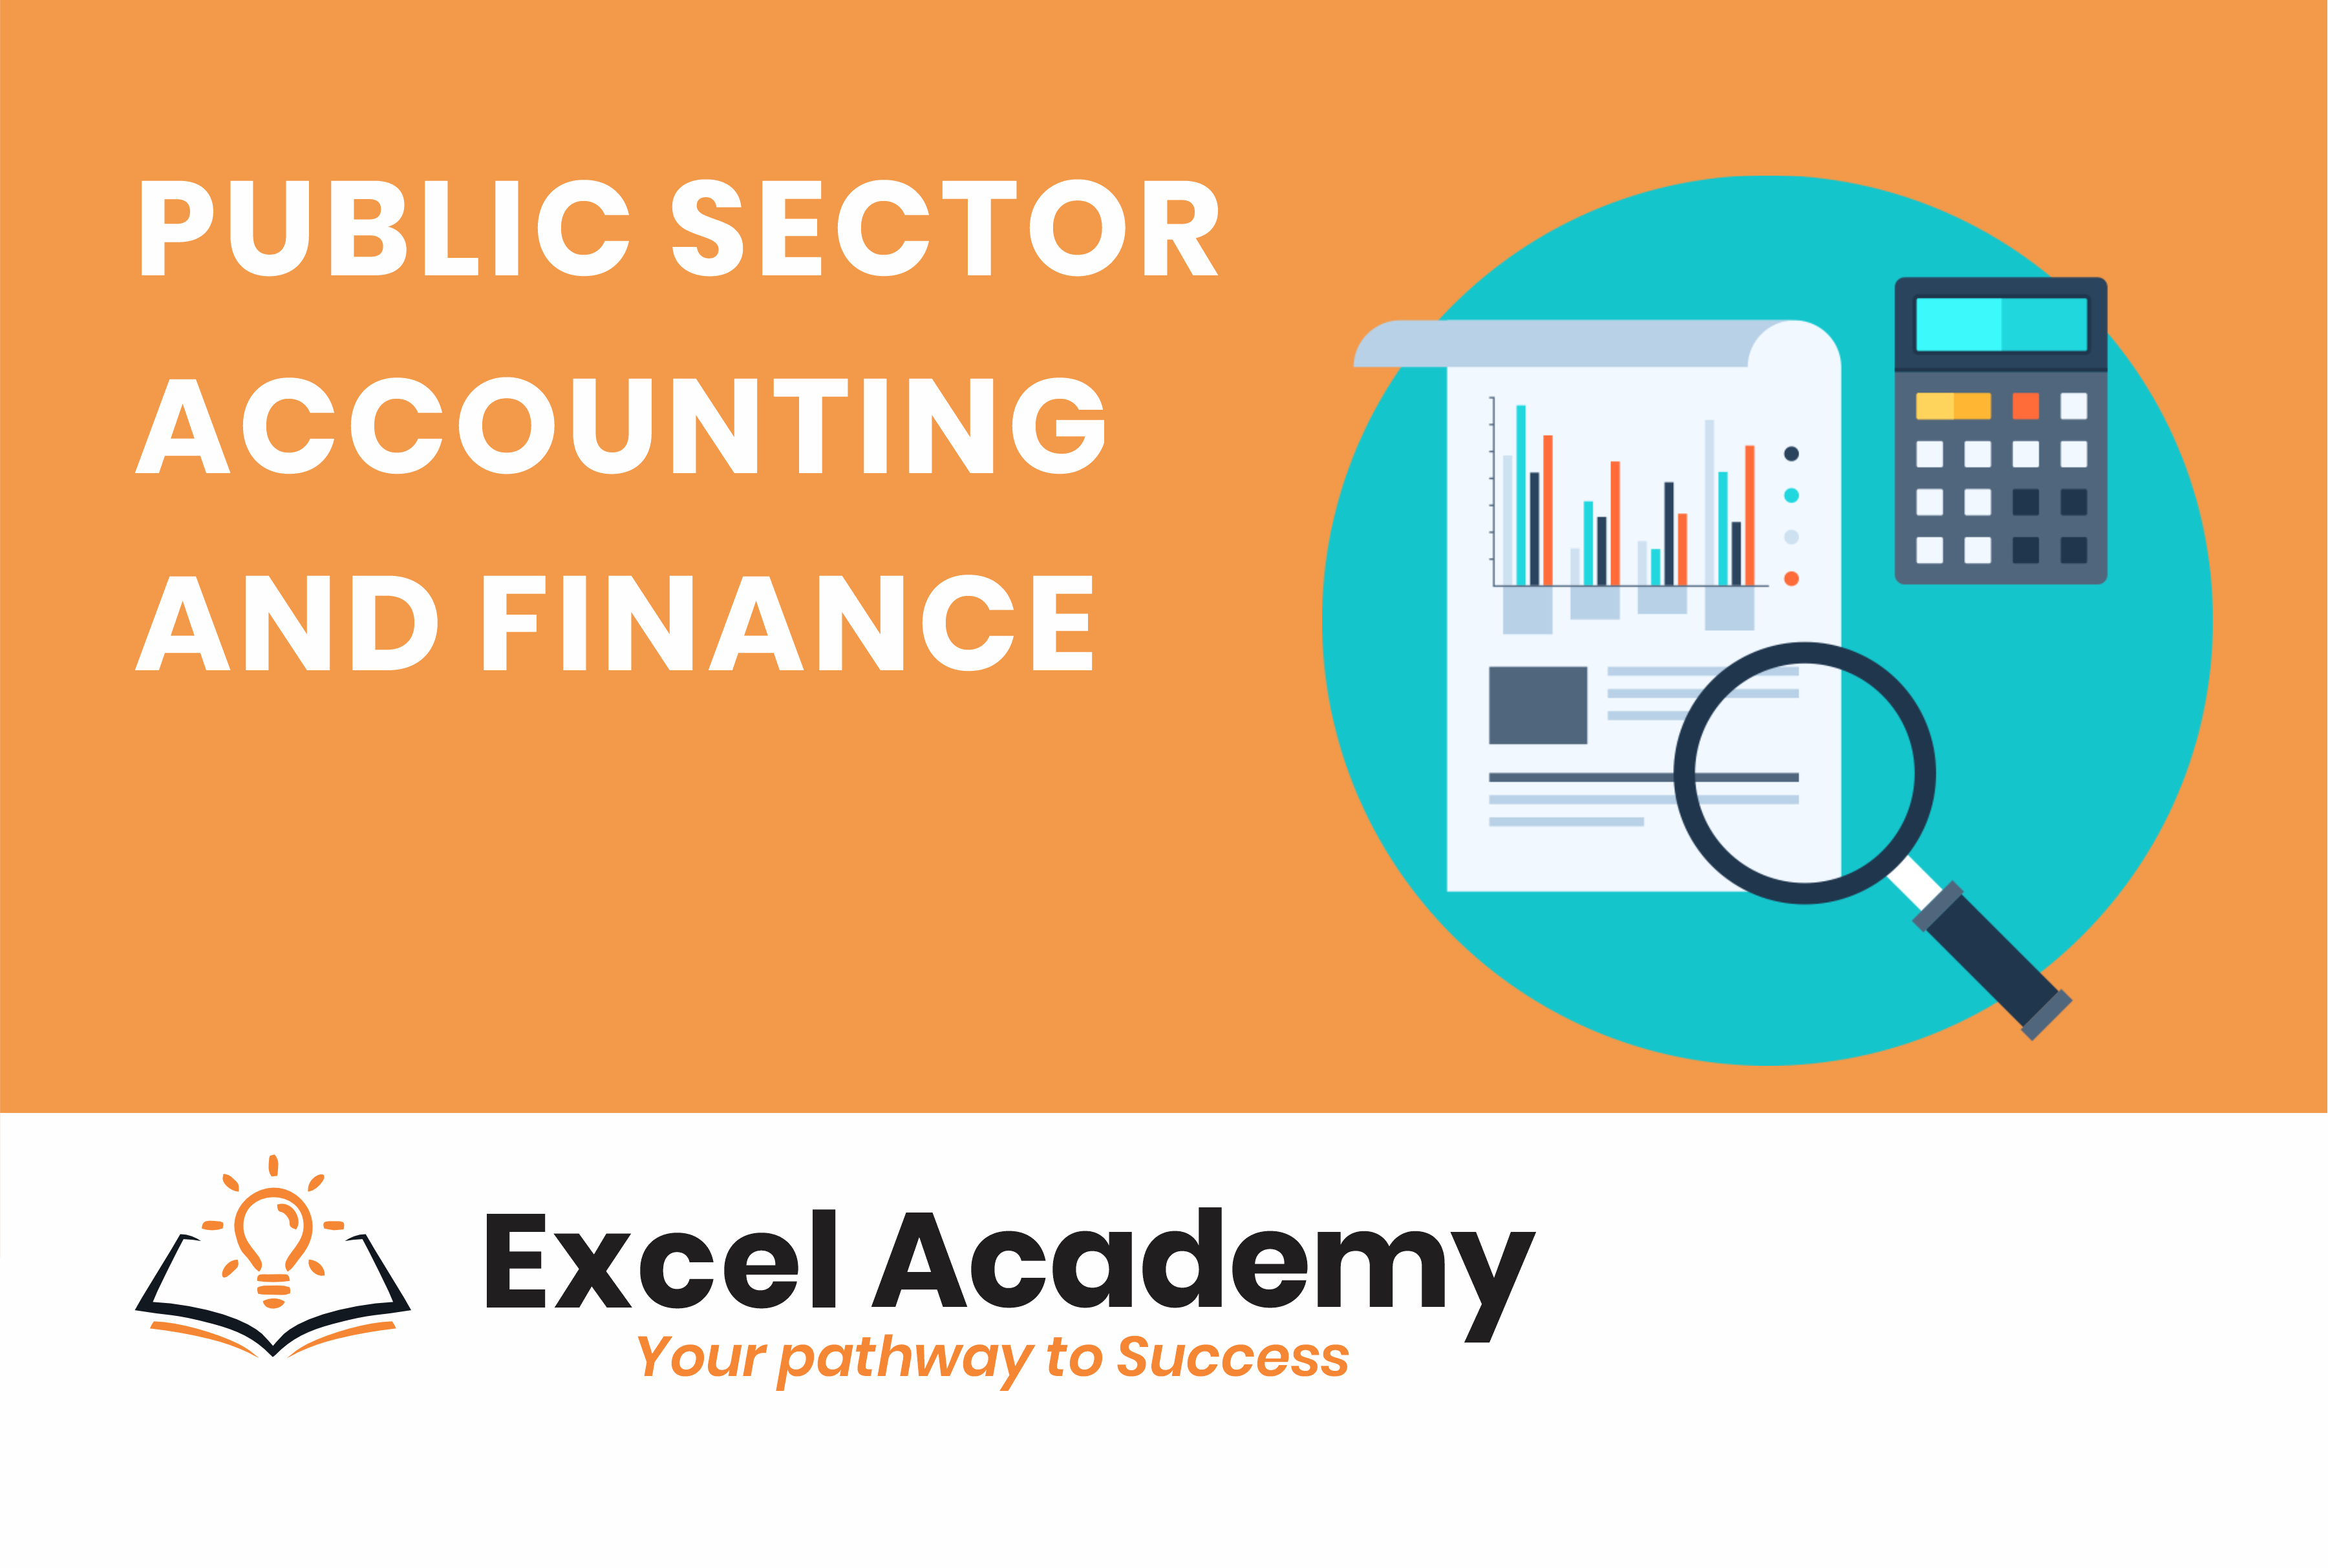 Public Sector Accounting and Finance